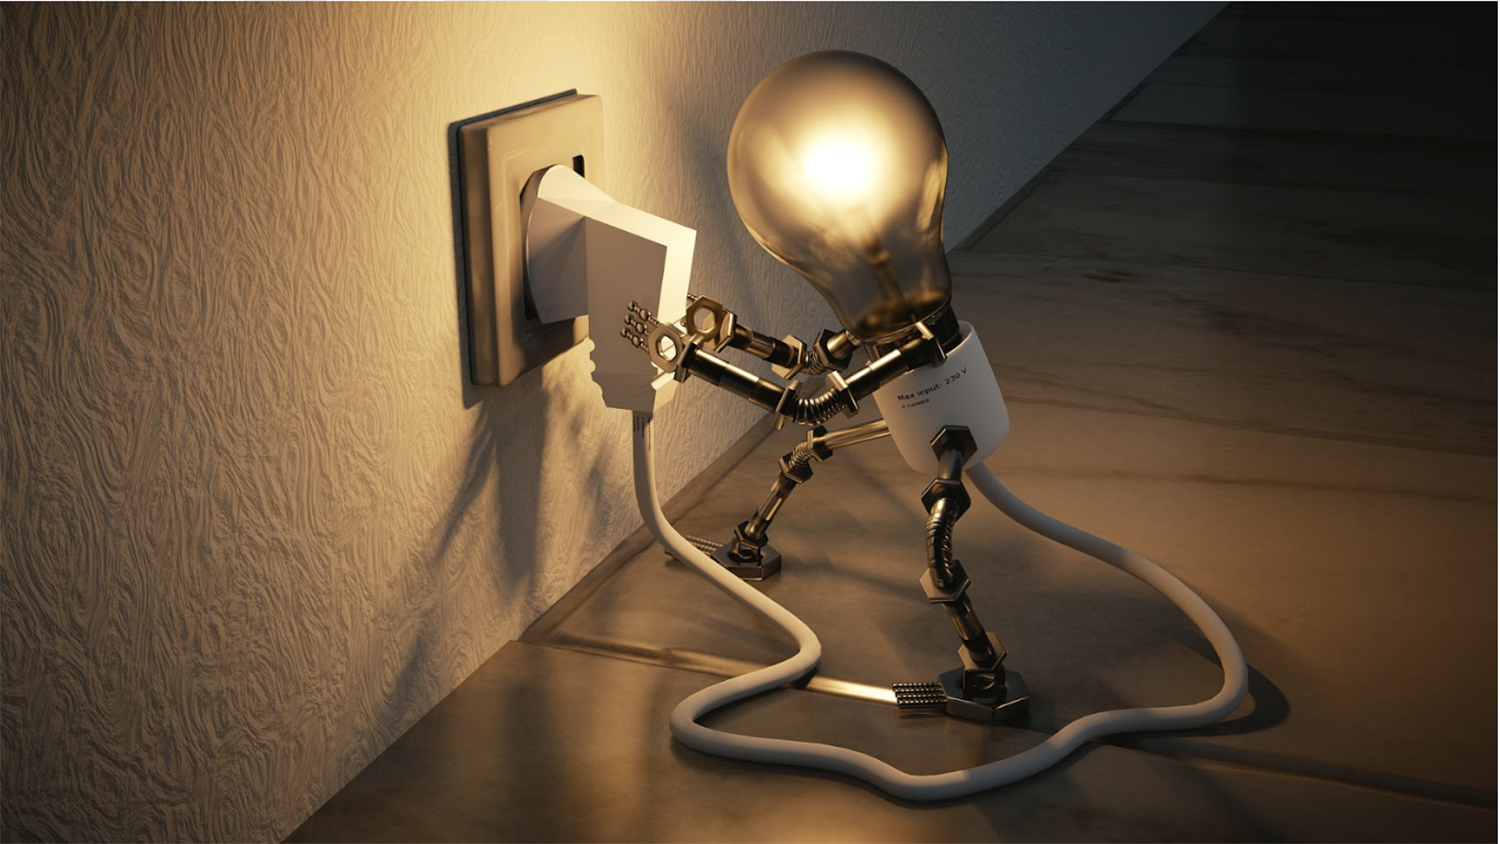 Decorative image of an animated lightbulb plugging itself into an electrical outlet.